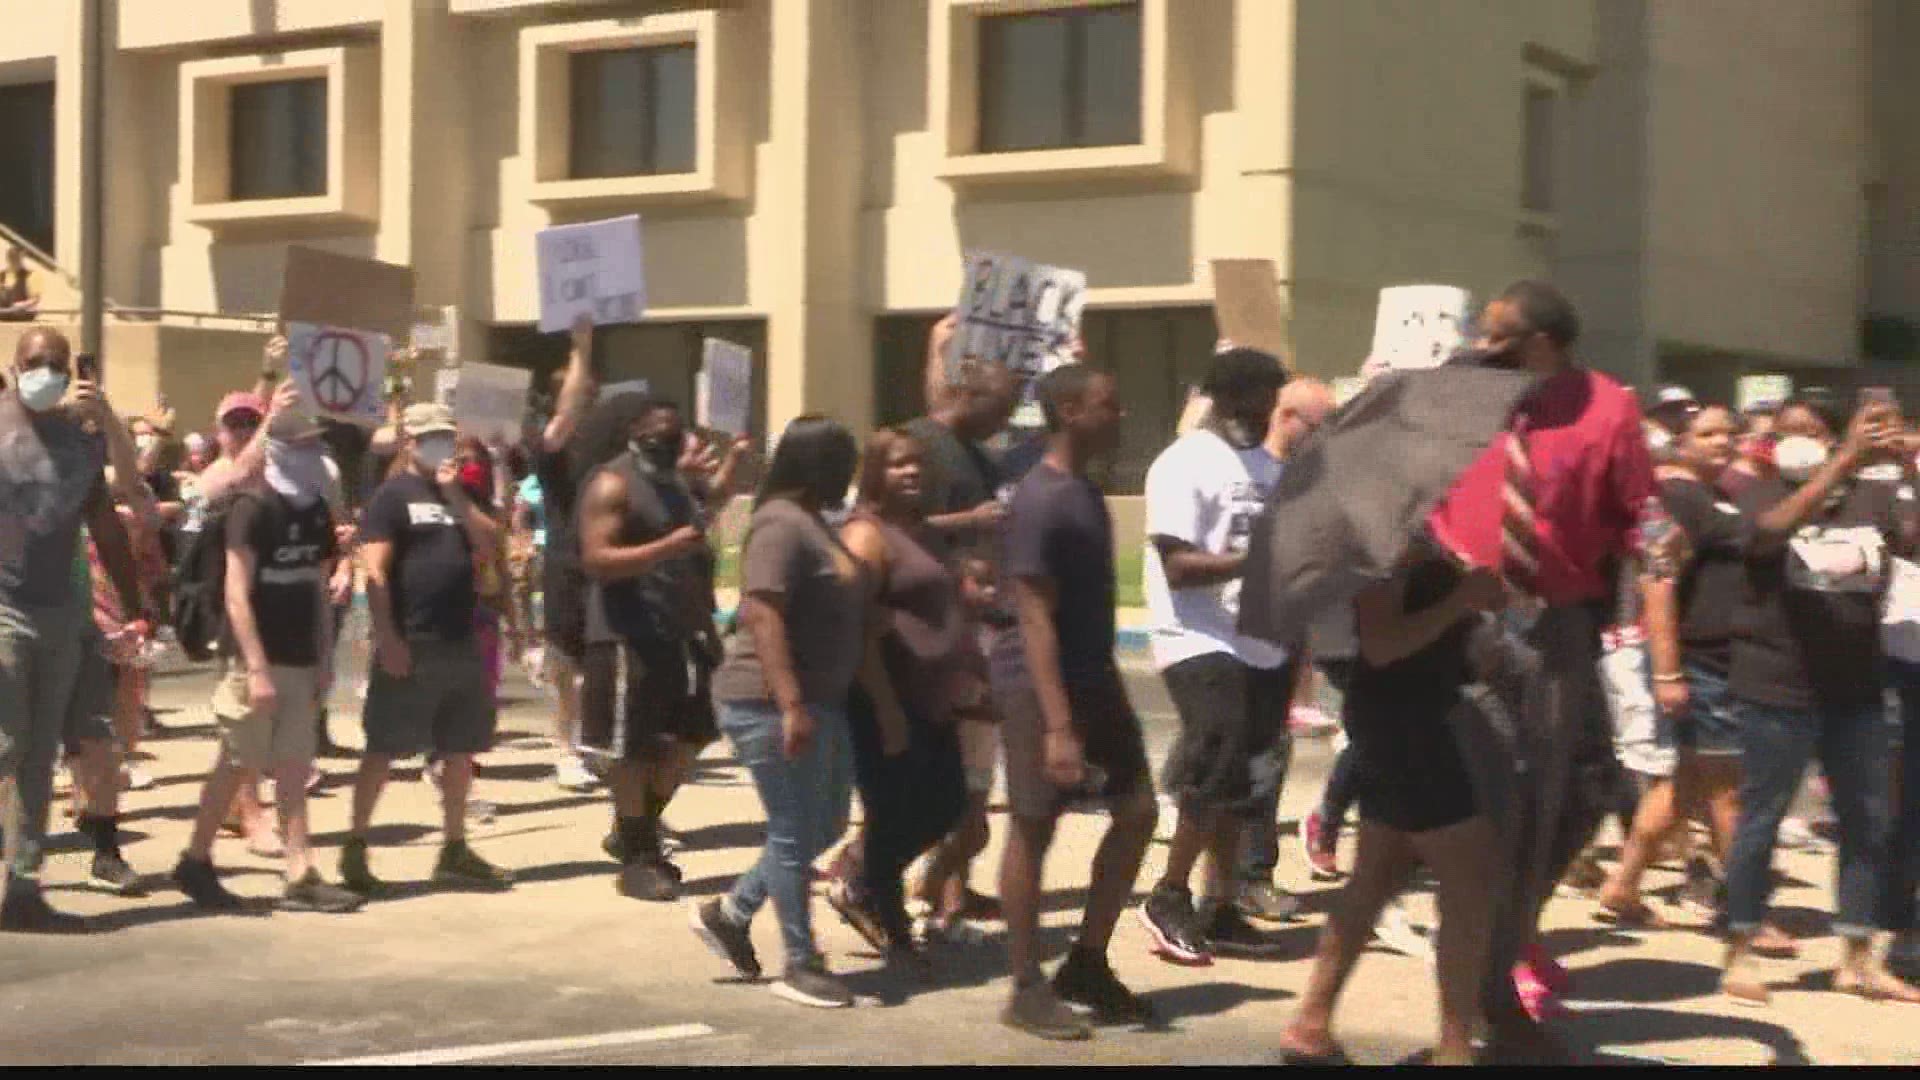 A peaceful demonstration to protest the killing of George Floyd was held at the Decatur Courthouse on Saturday.